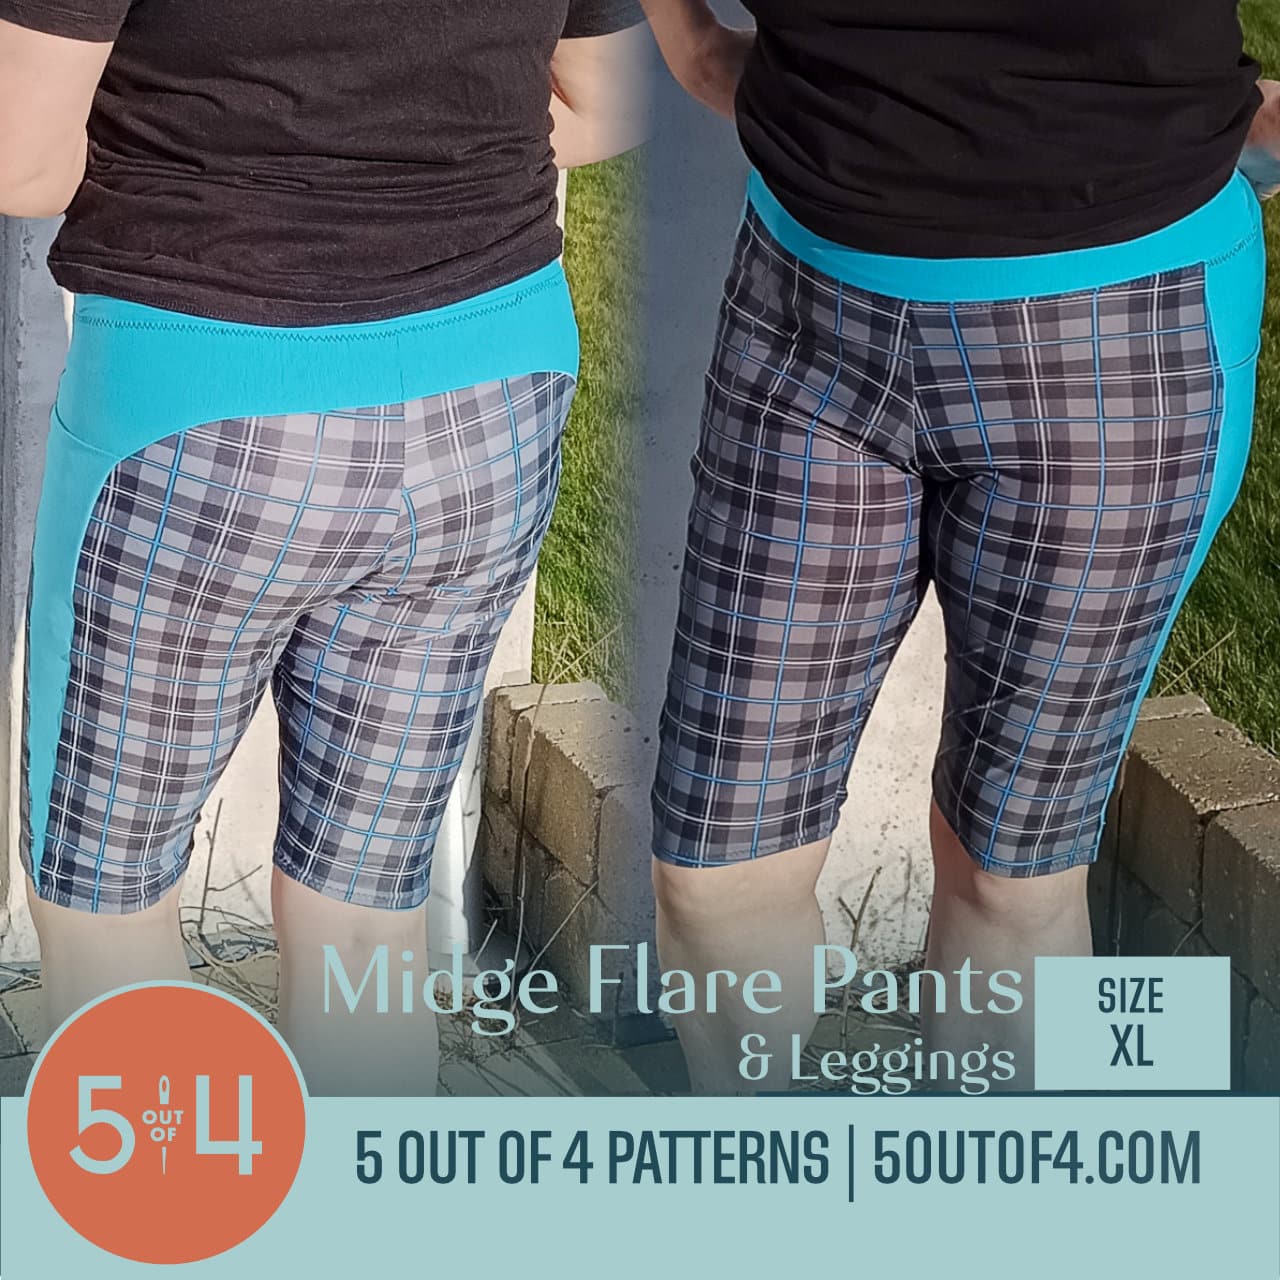 Midge Flare Pants and Leggings - 5 out of 4 Patterns